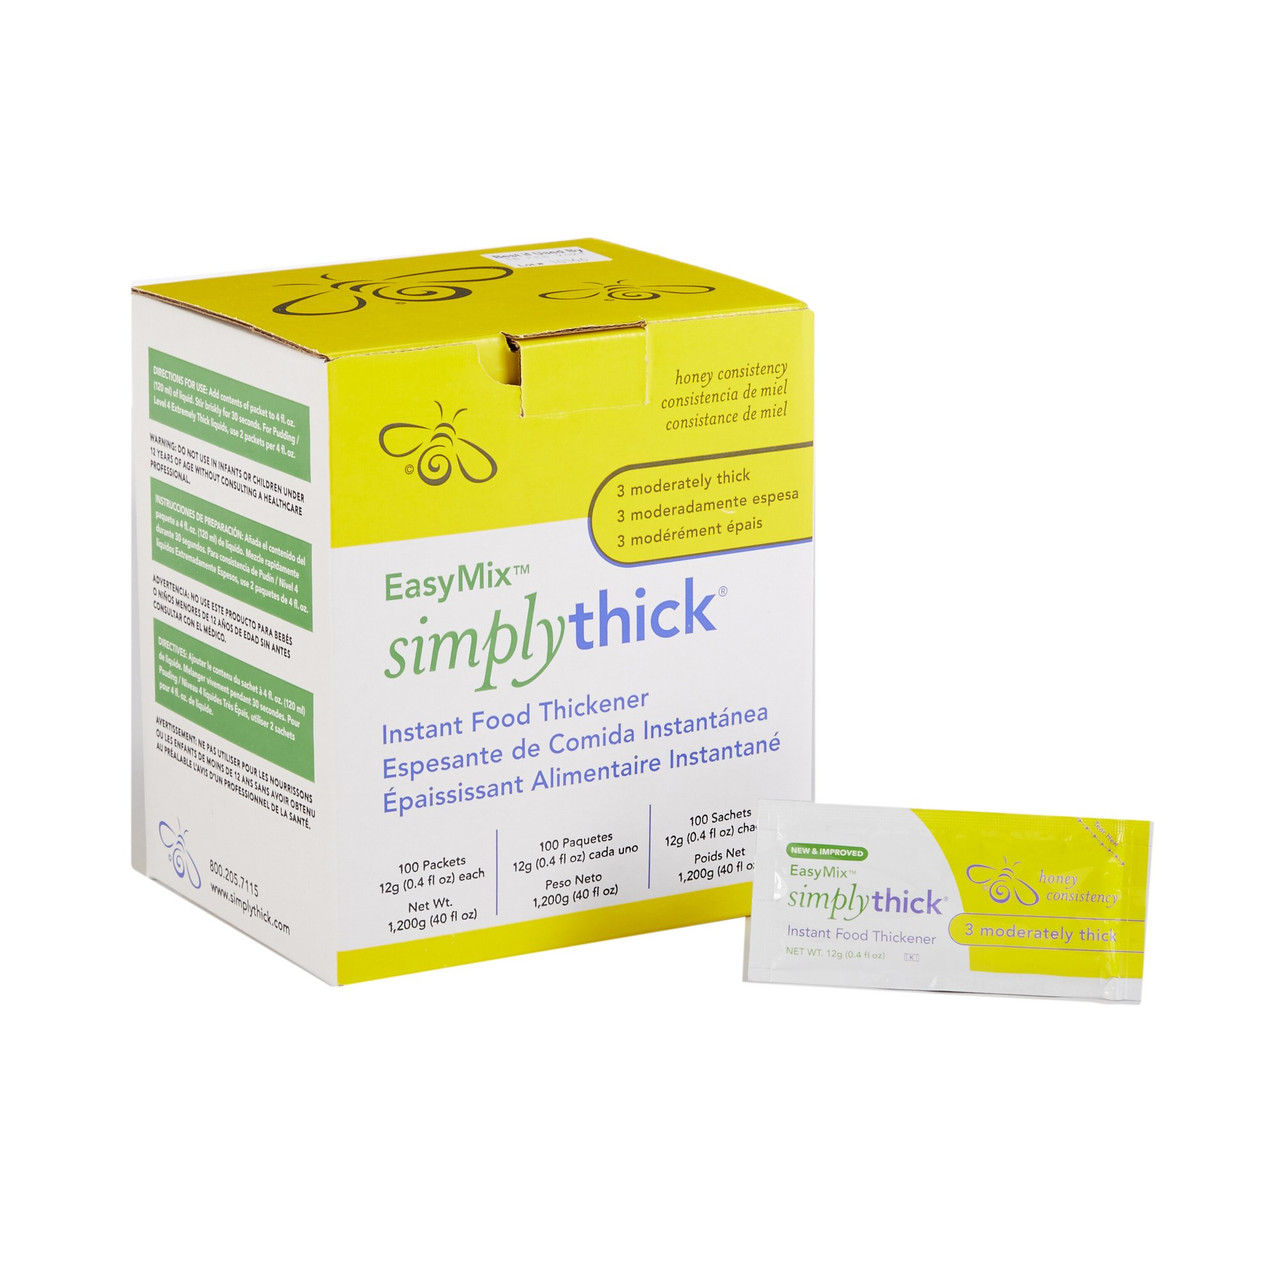 STIND80L2: Mildly Thick (L2,Nectar) - 80 count individual packets